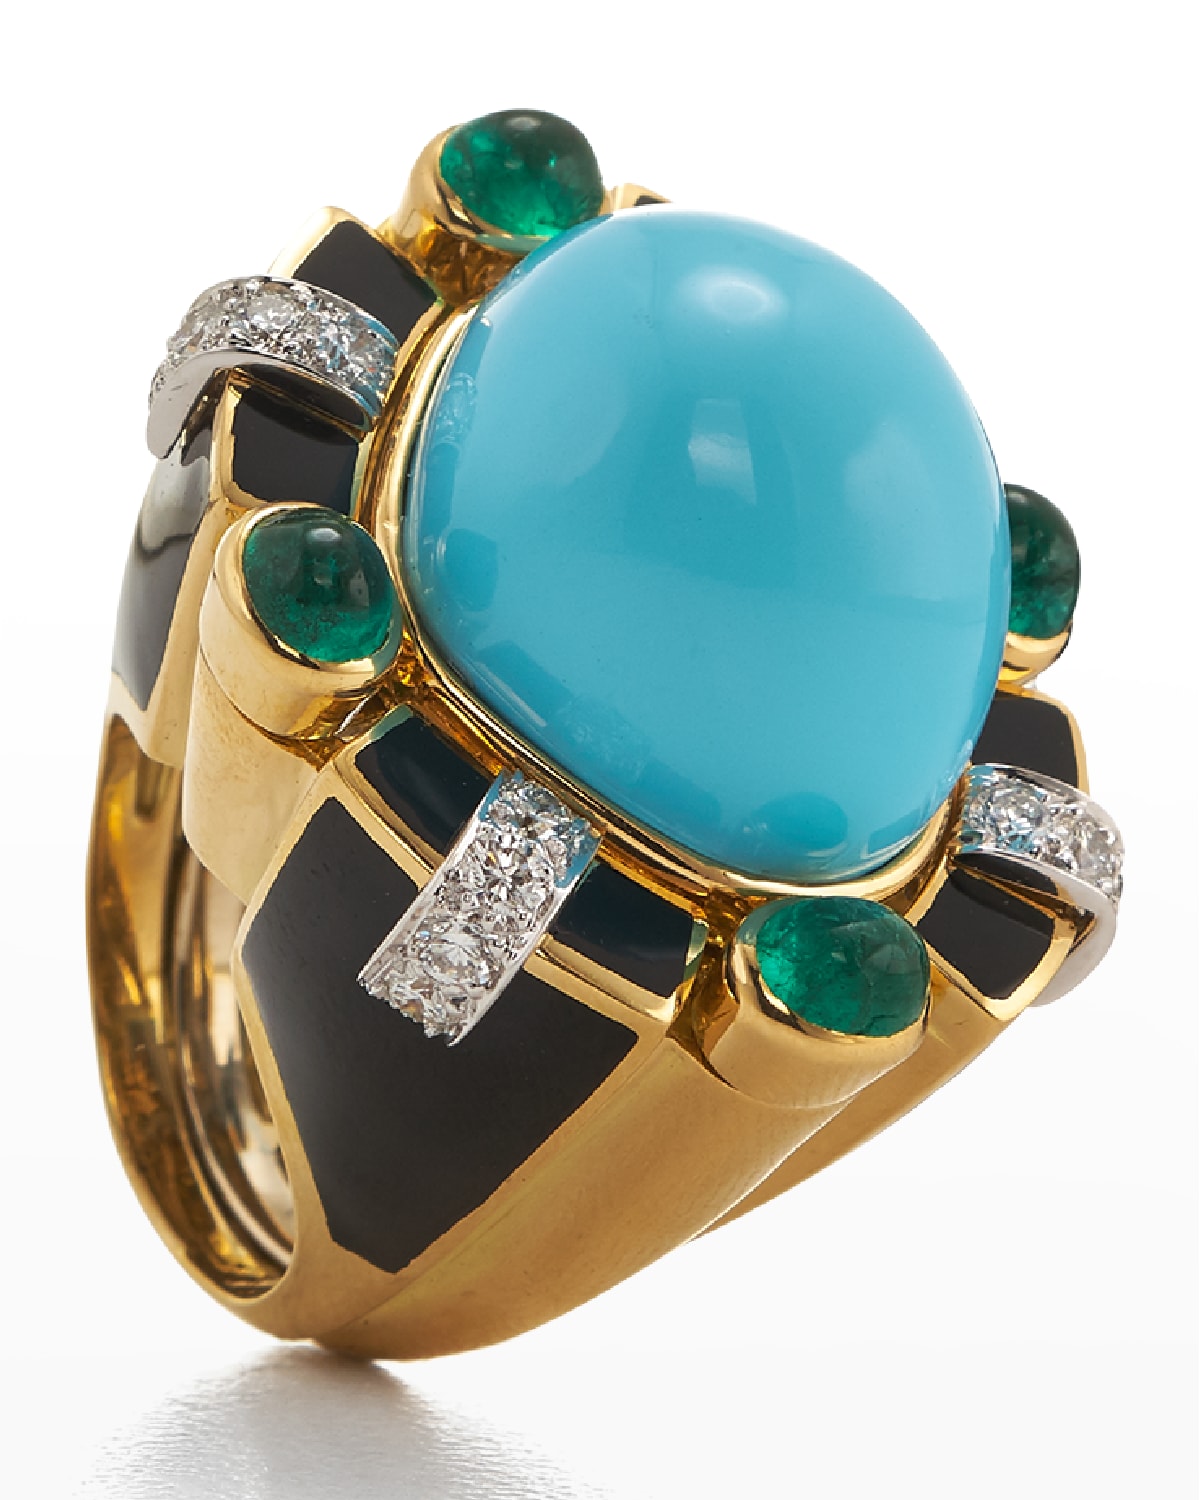 Turquoise, Emerald and Diamond Ring, Size 6.5